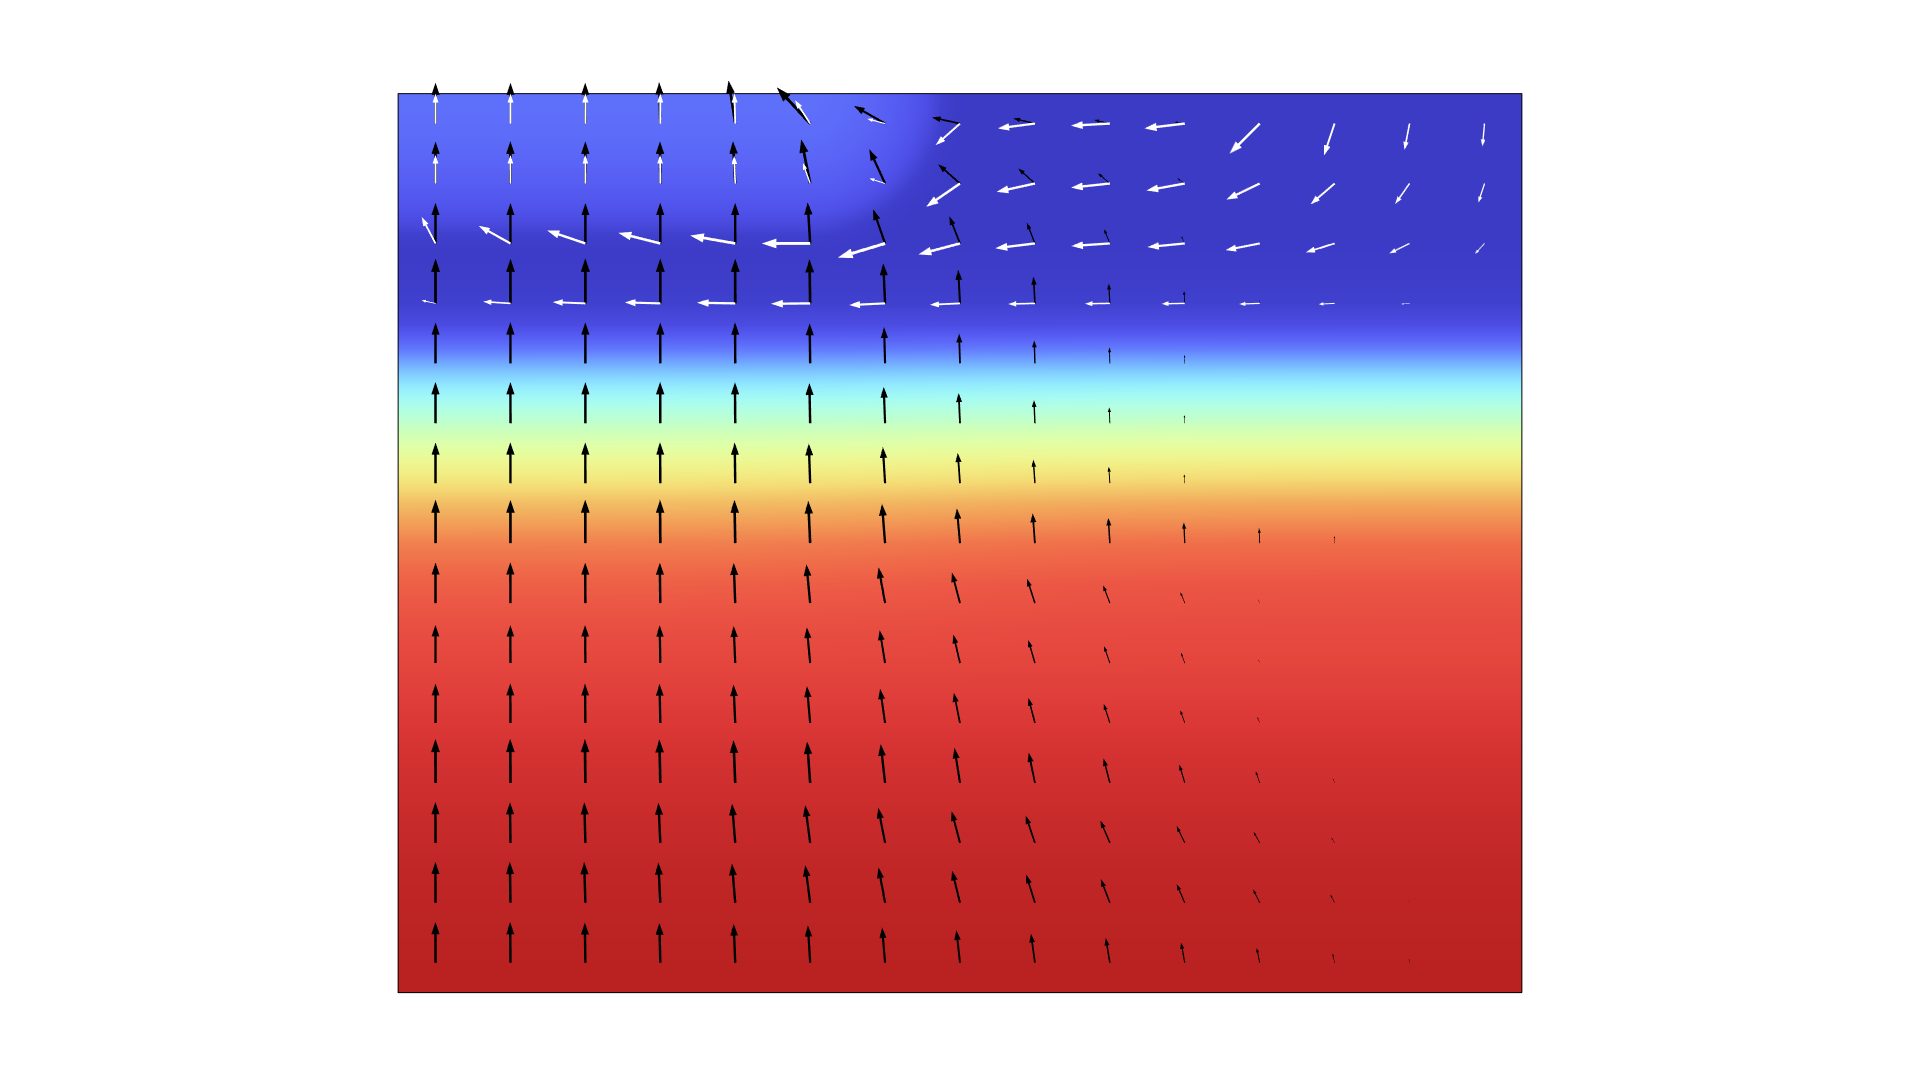 A 2D bipolar transistor model showing the electric potential distribution in the Rainbow Light color table.